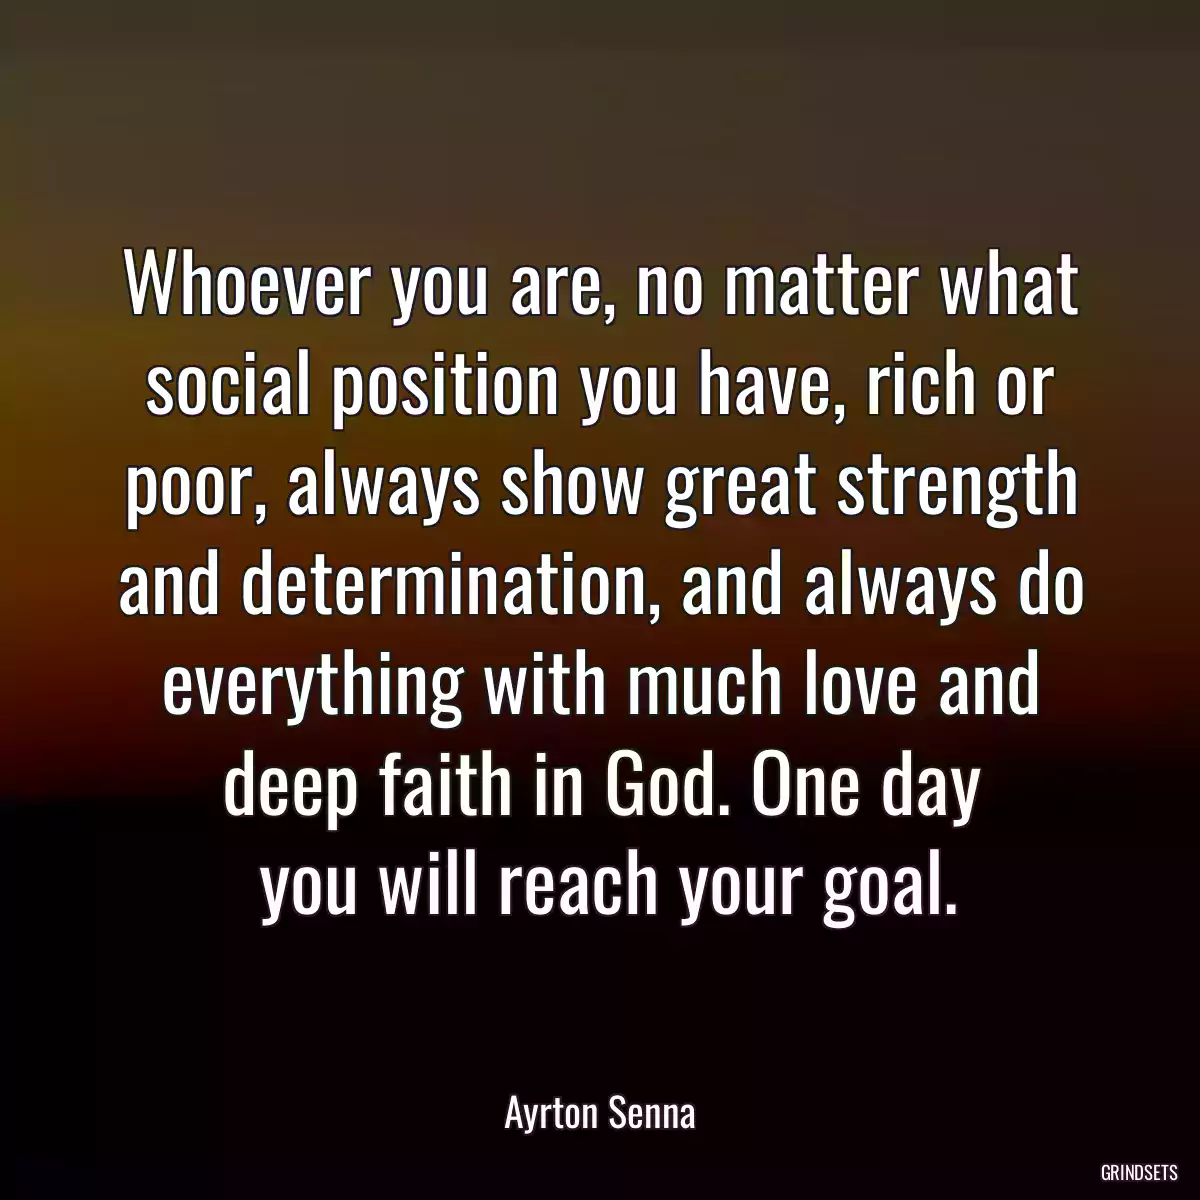 Whoever you are, no matter what social position you have, rich or poor, always show great strength and determination, and always do everything with much love and deep faith in God. One day
 you will reach your goal.